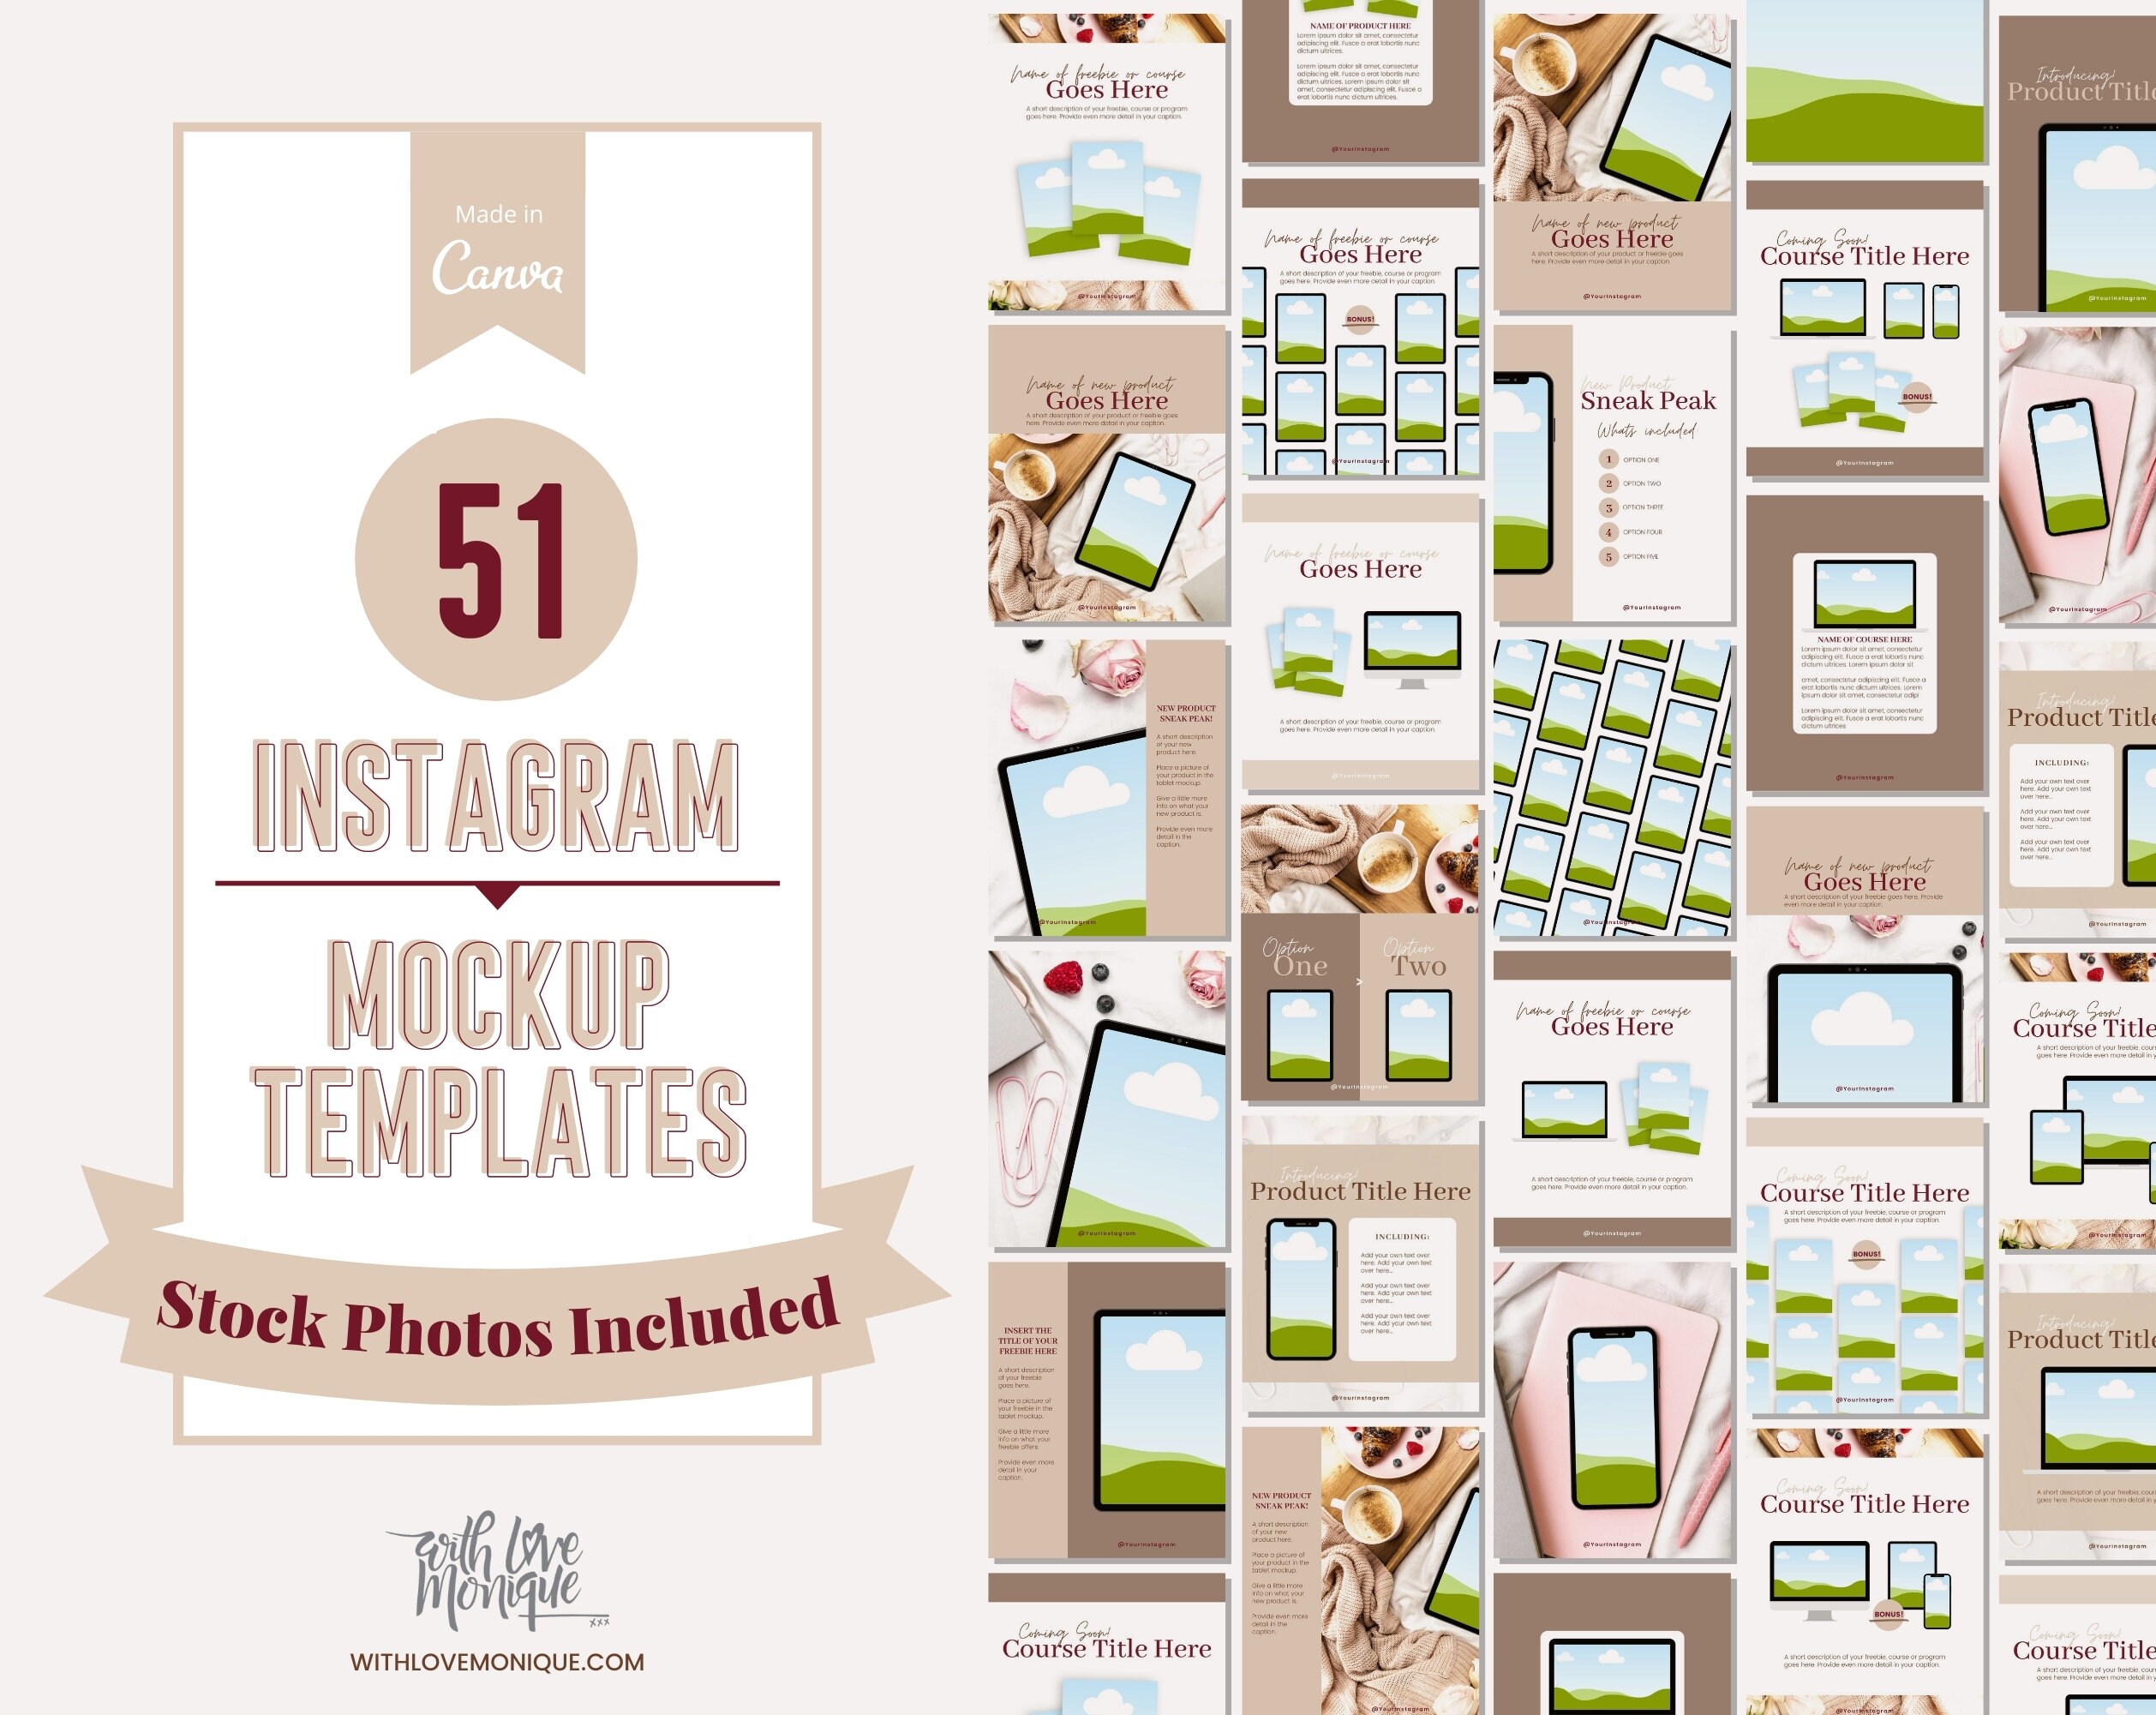 Phototech designs, themes, templates and downloadable graphic